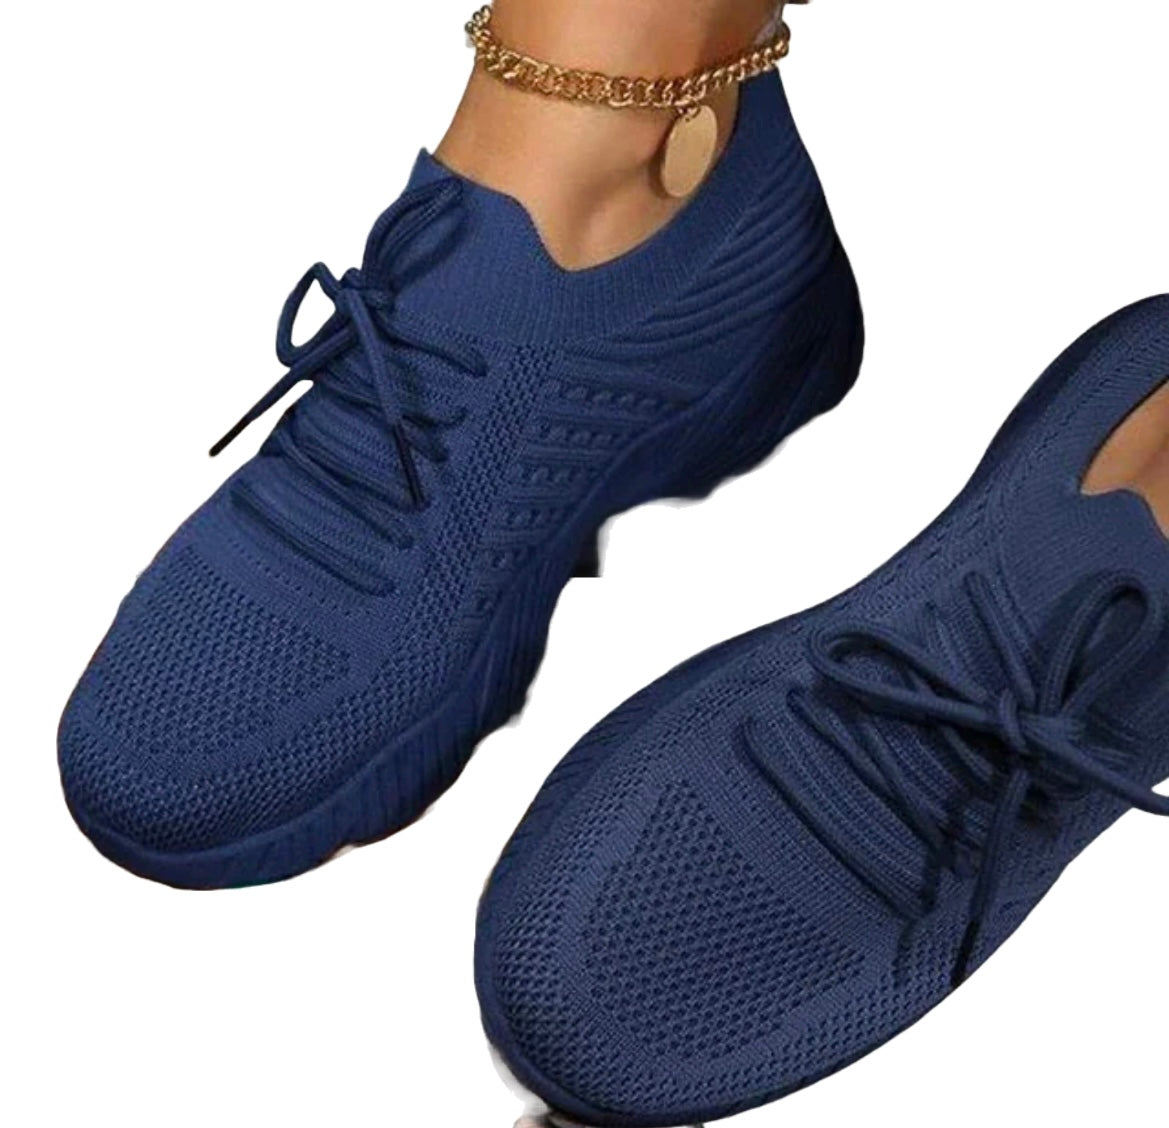 Women’s Fashion Sneakers - Lace Up, Platform Shoes - Blue - Free Delivery